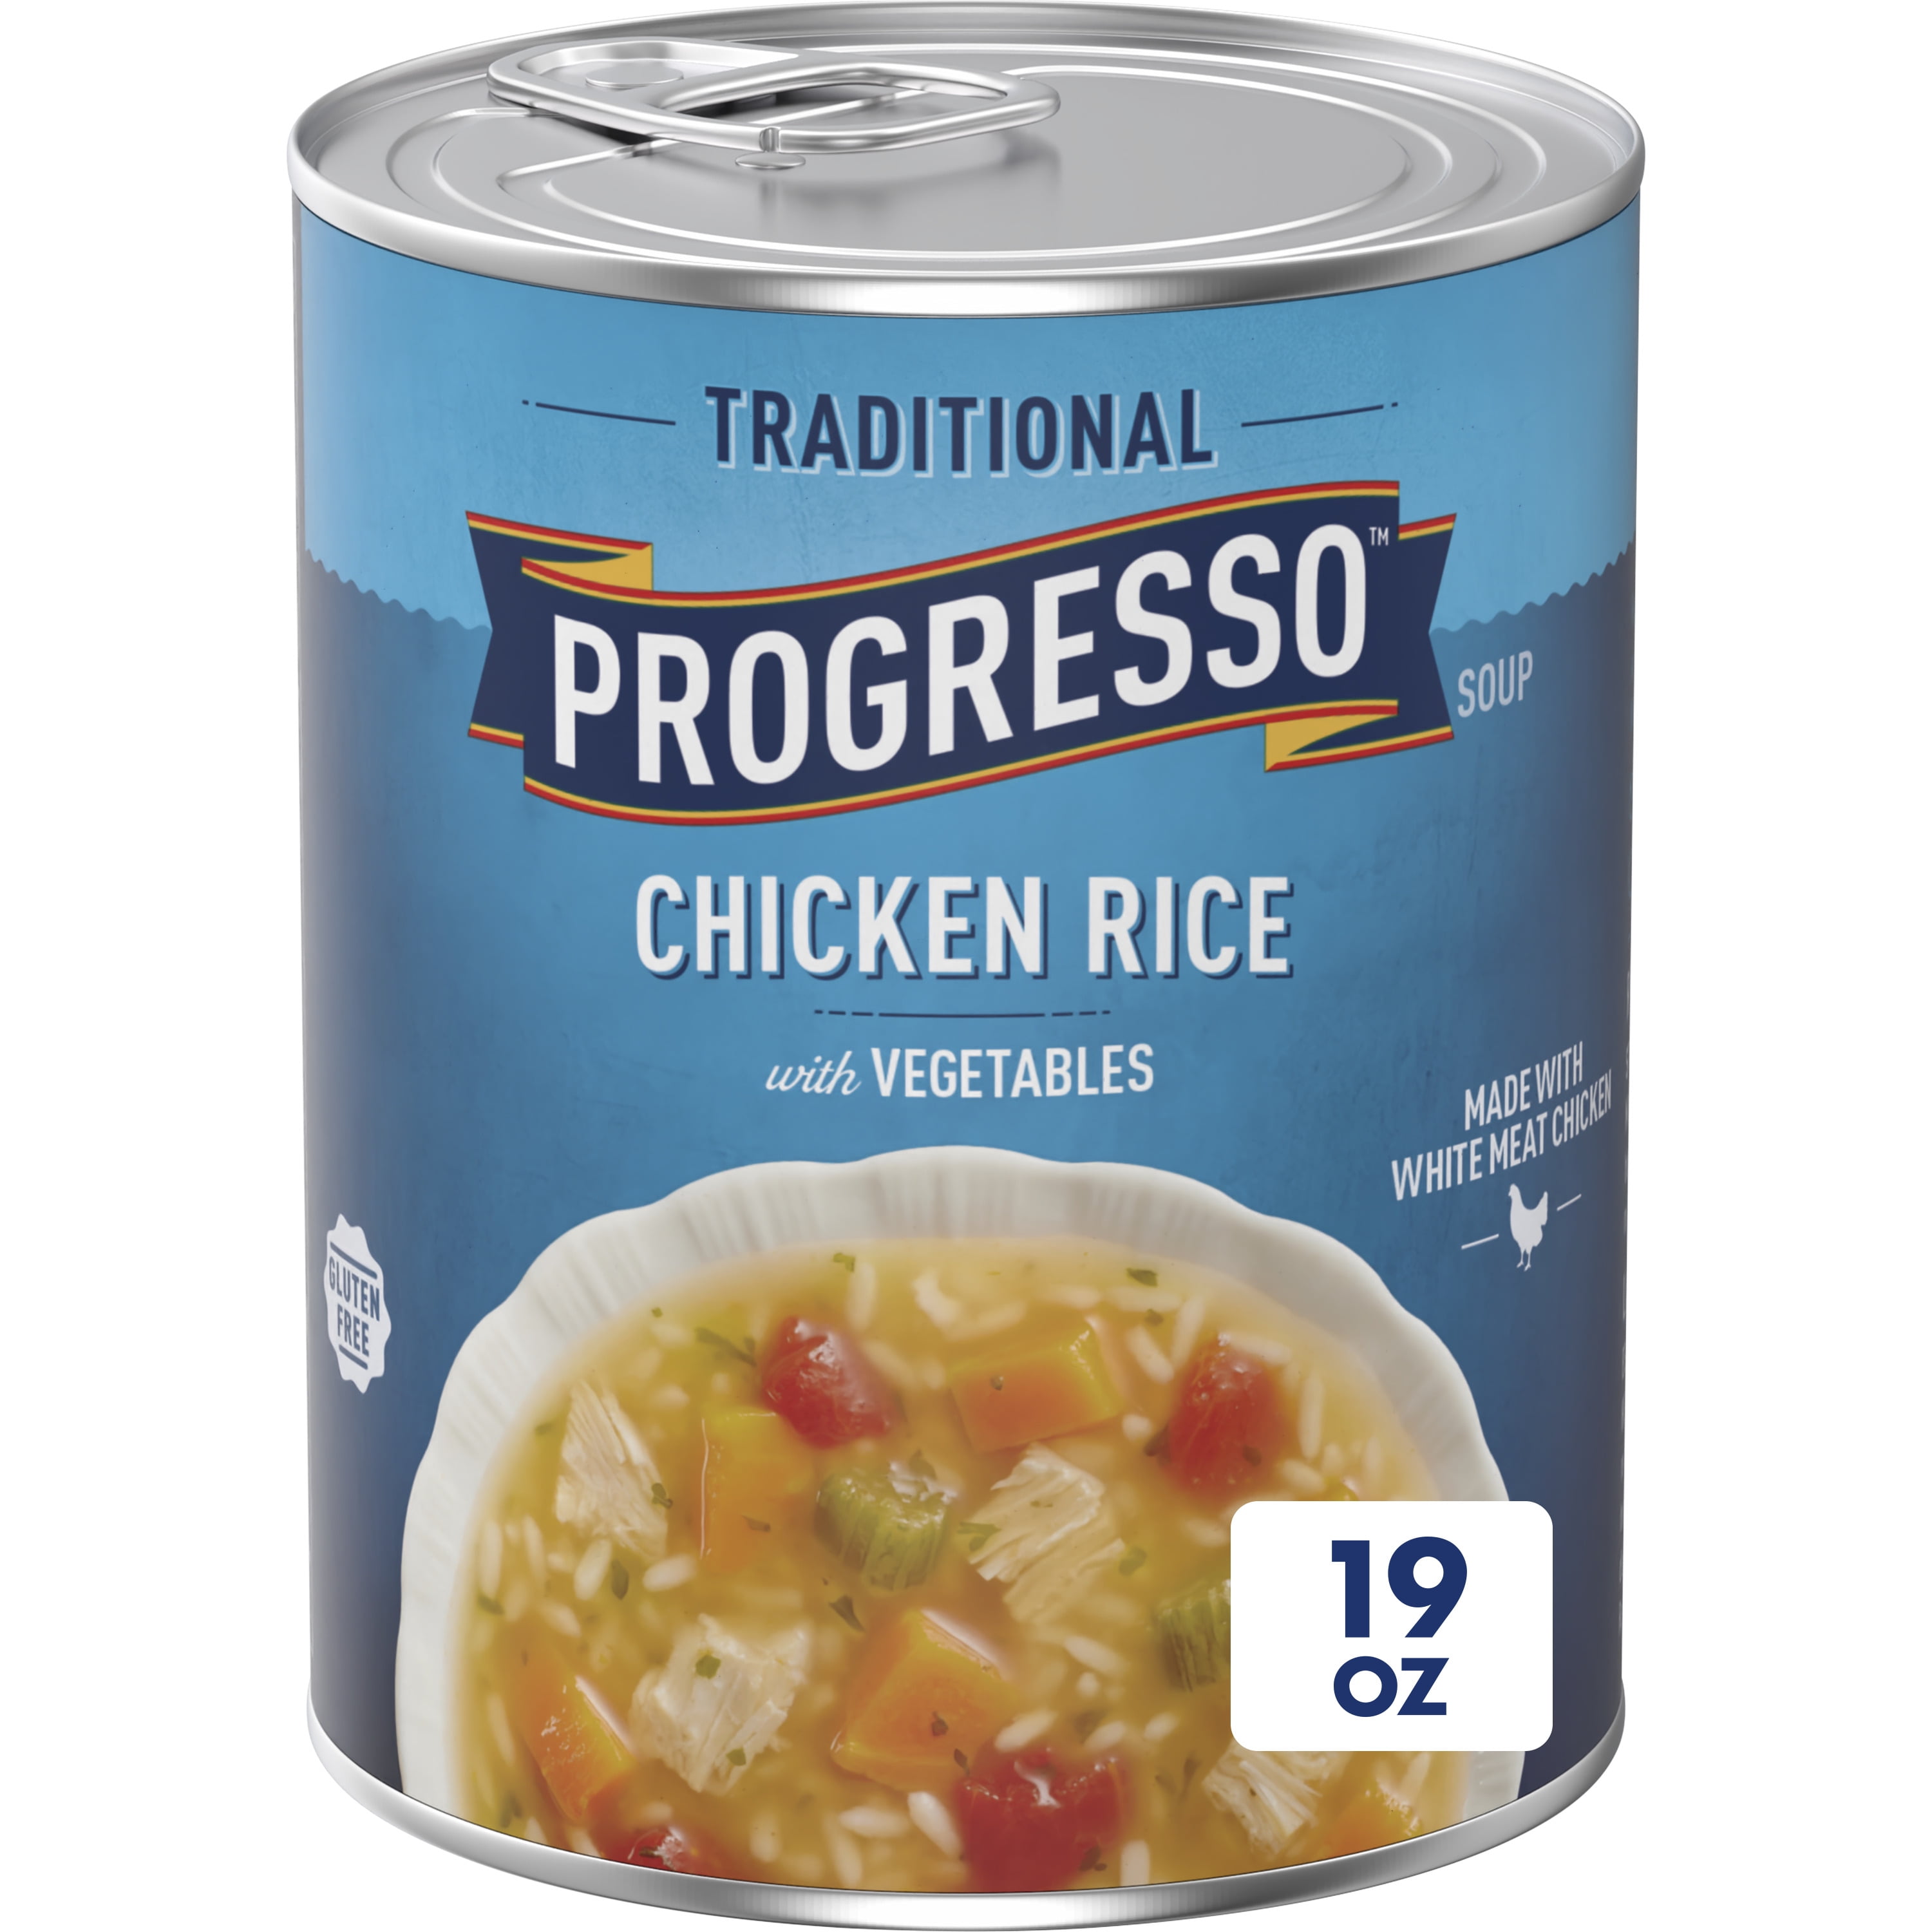 Chicken & Rice Soup, 24 oz at Whole Foods Market